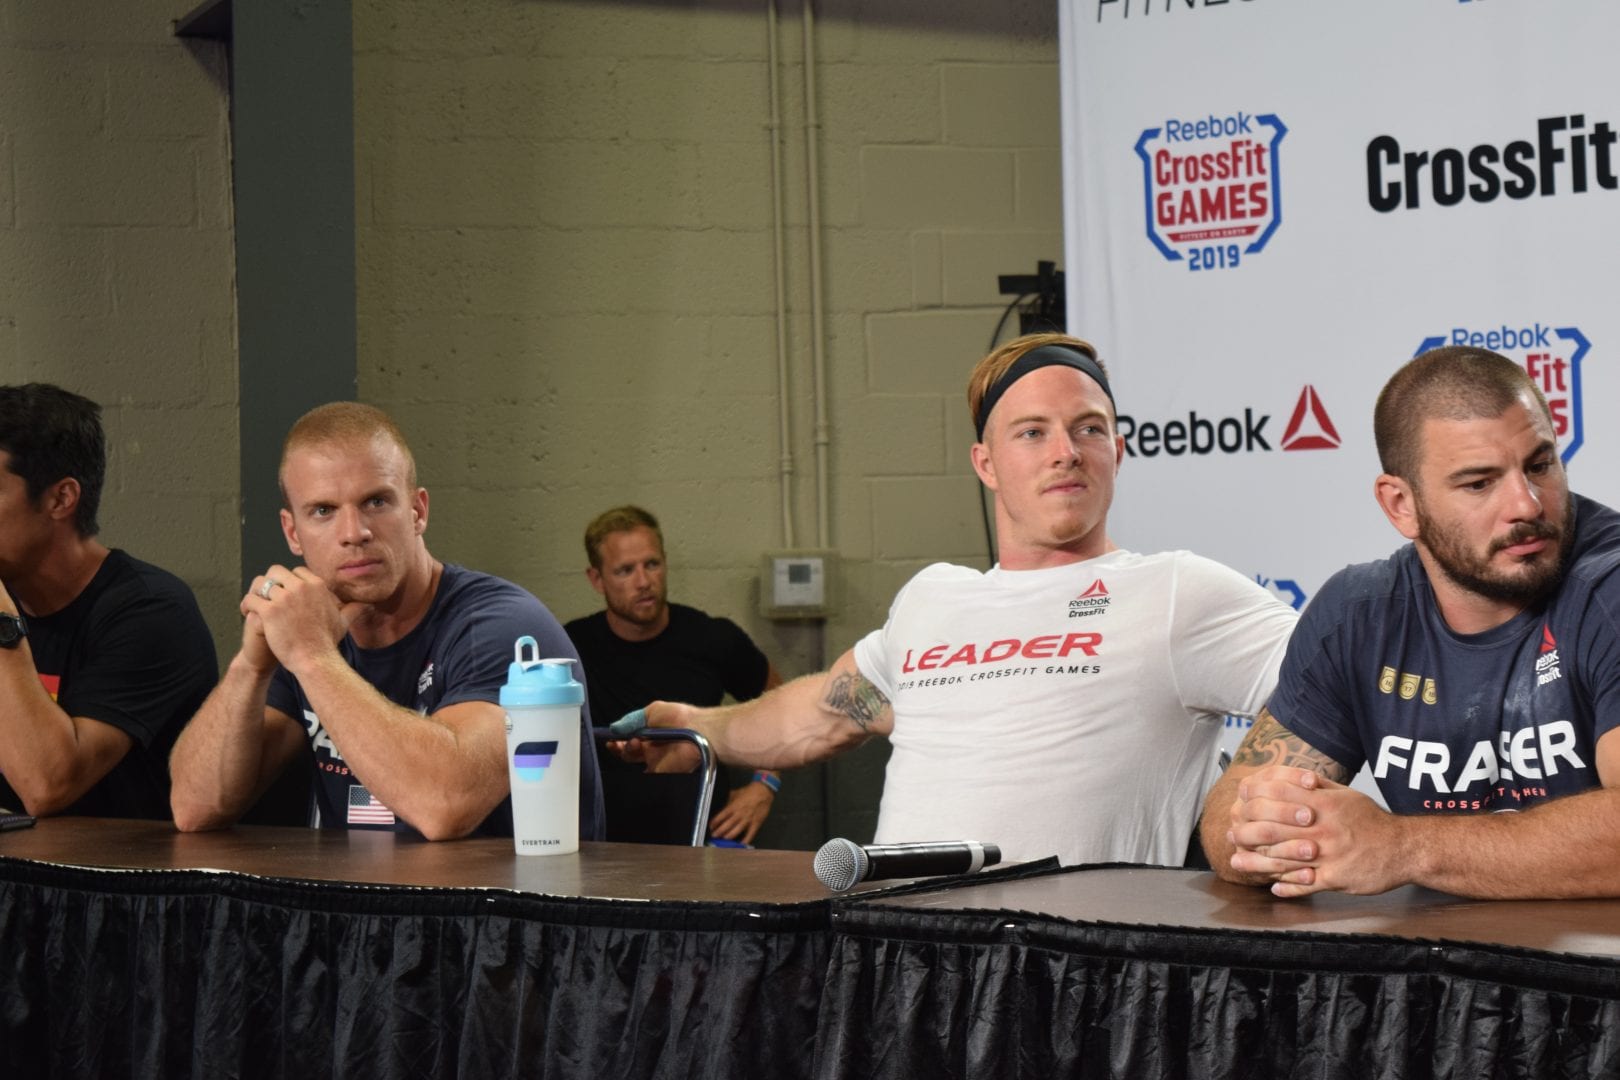 Scott Panchik at an end-of-day press conference with Dave Castro and Noah Ohlsen during the 2019 CrossFit Games